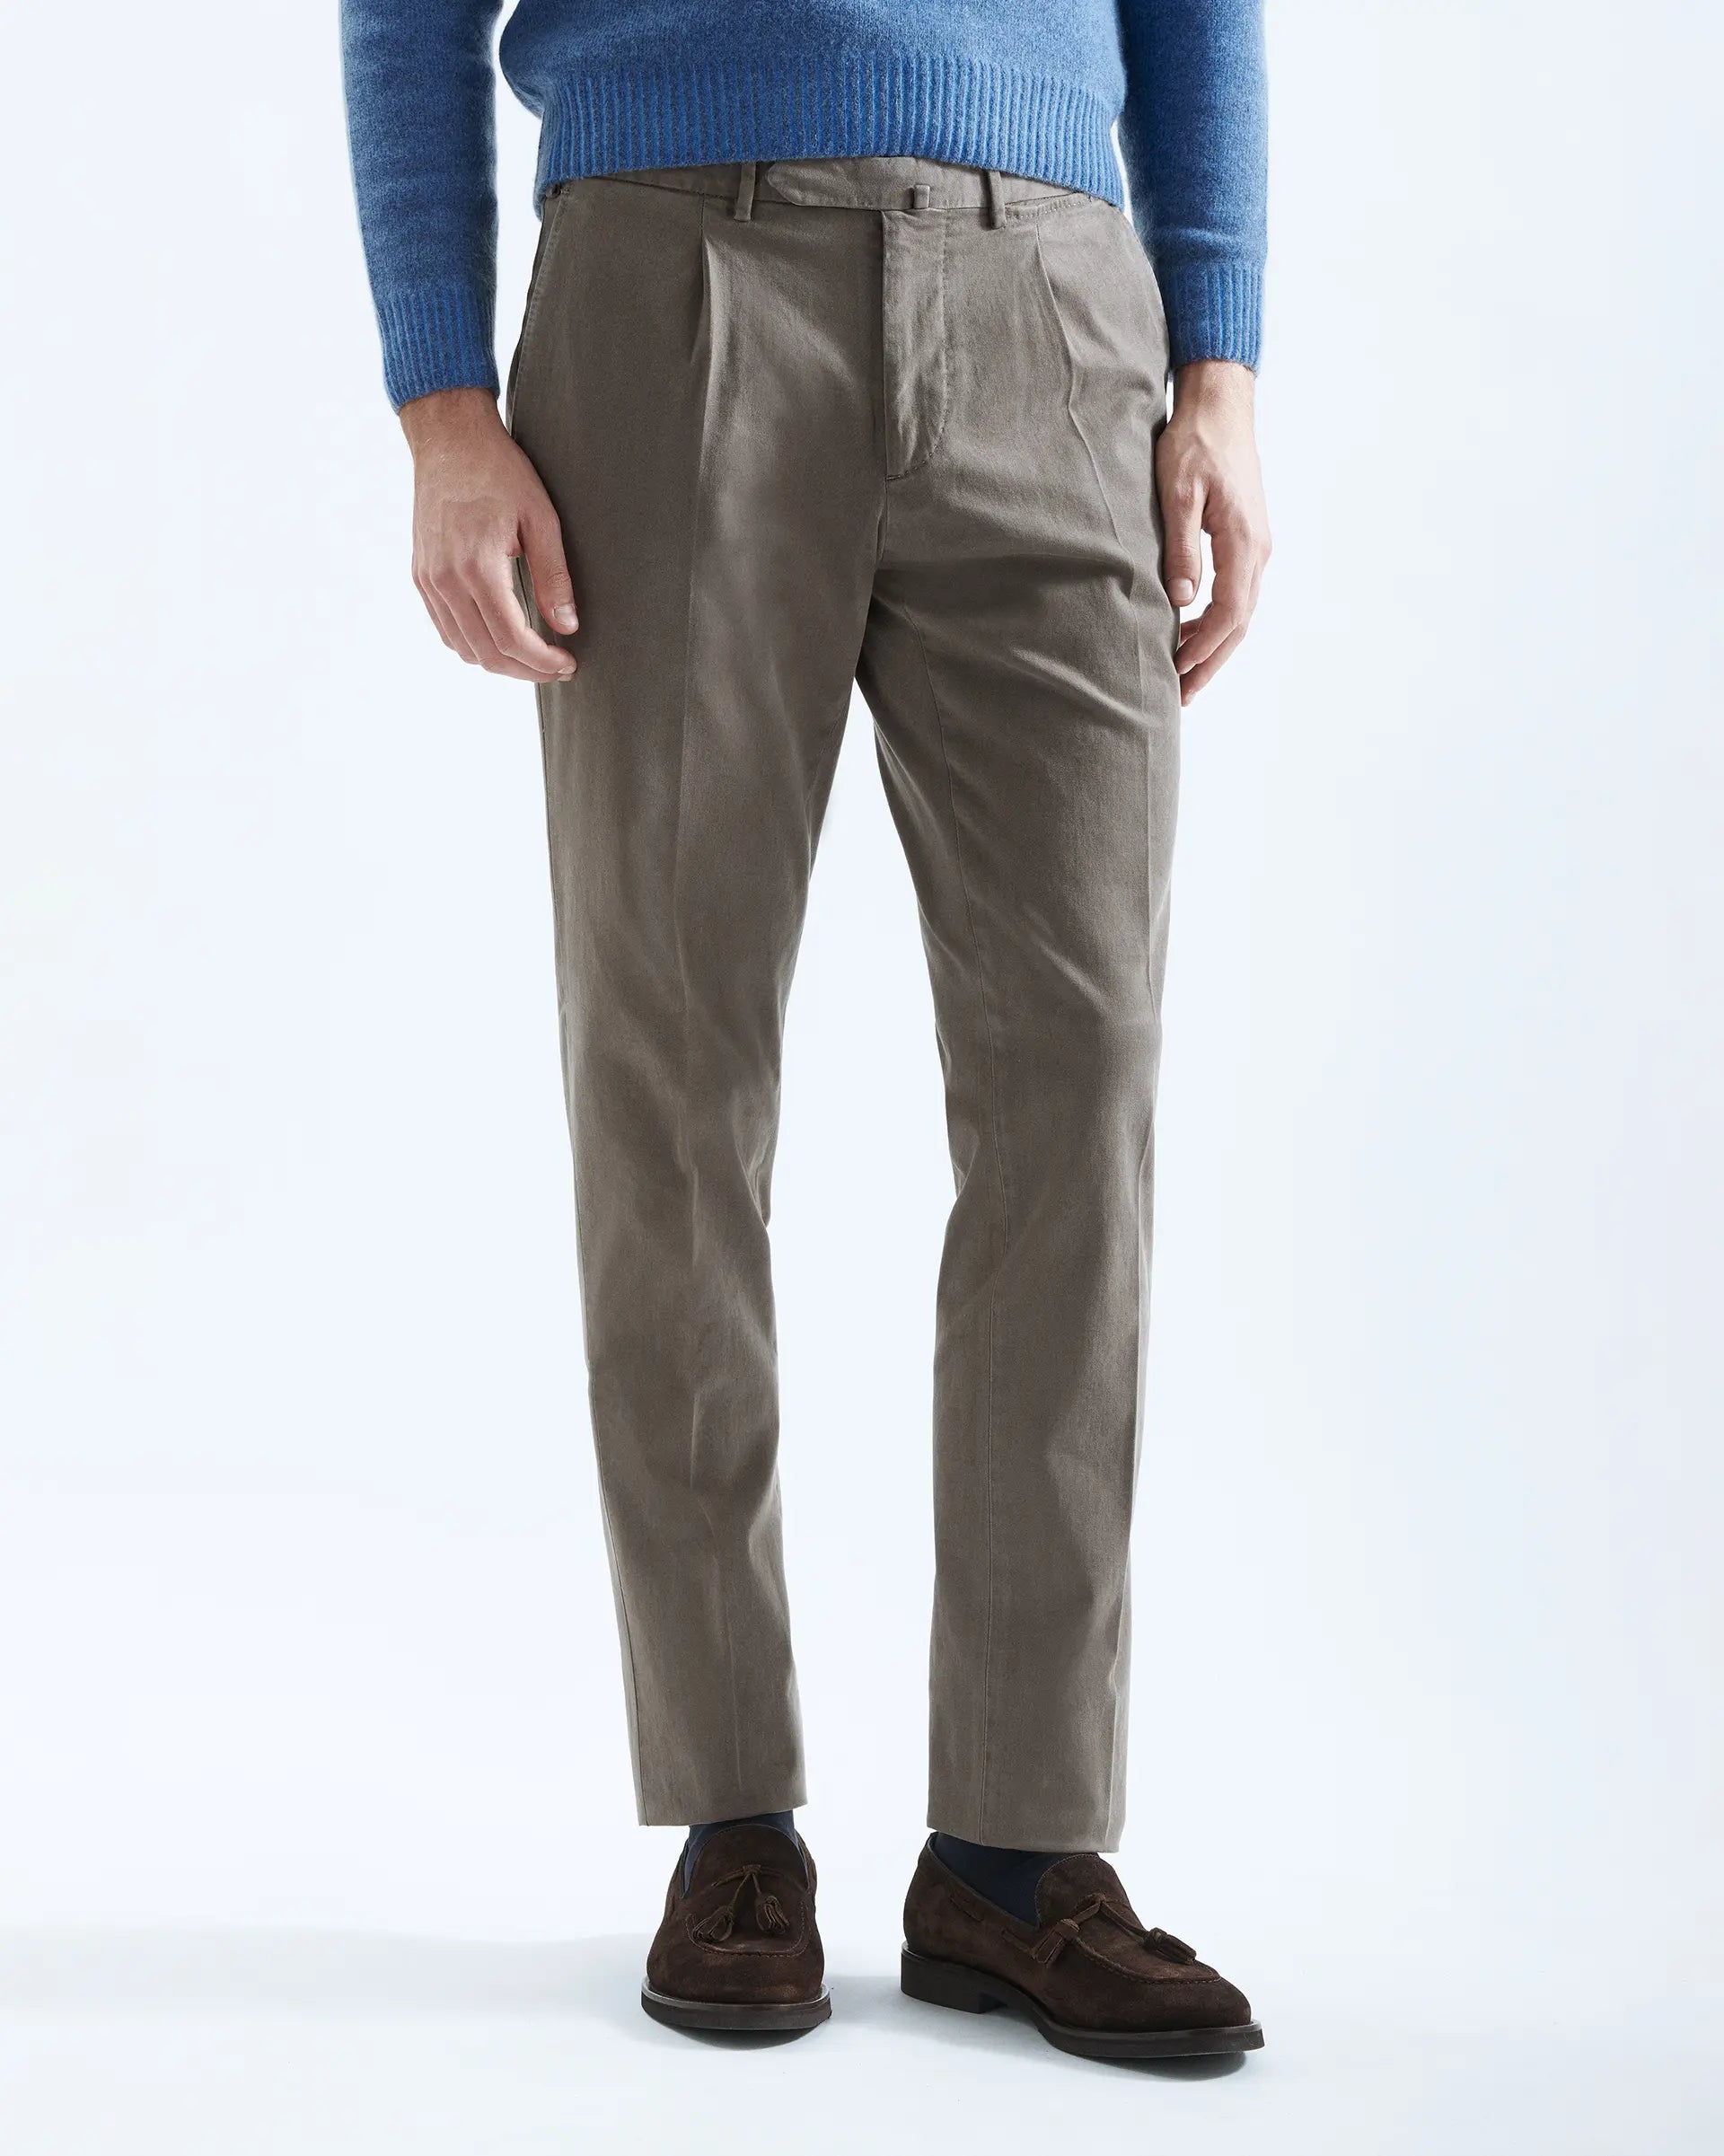 Taupe Twill Cotton Stretch Pants